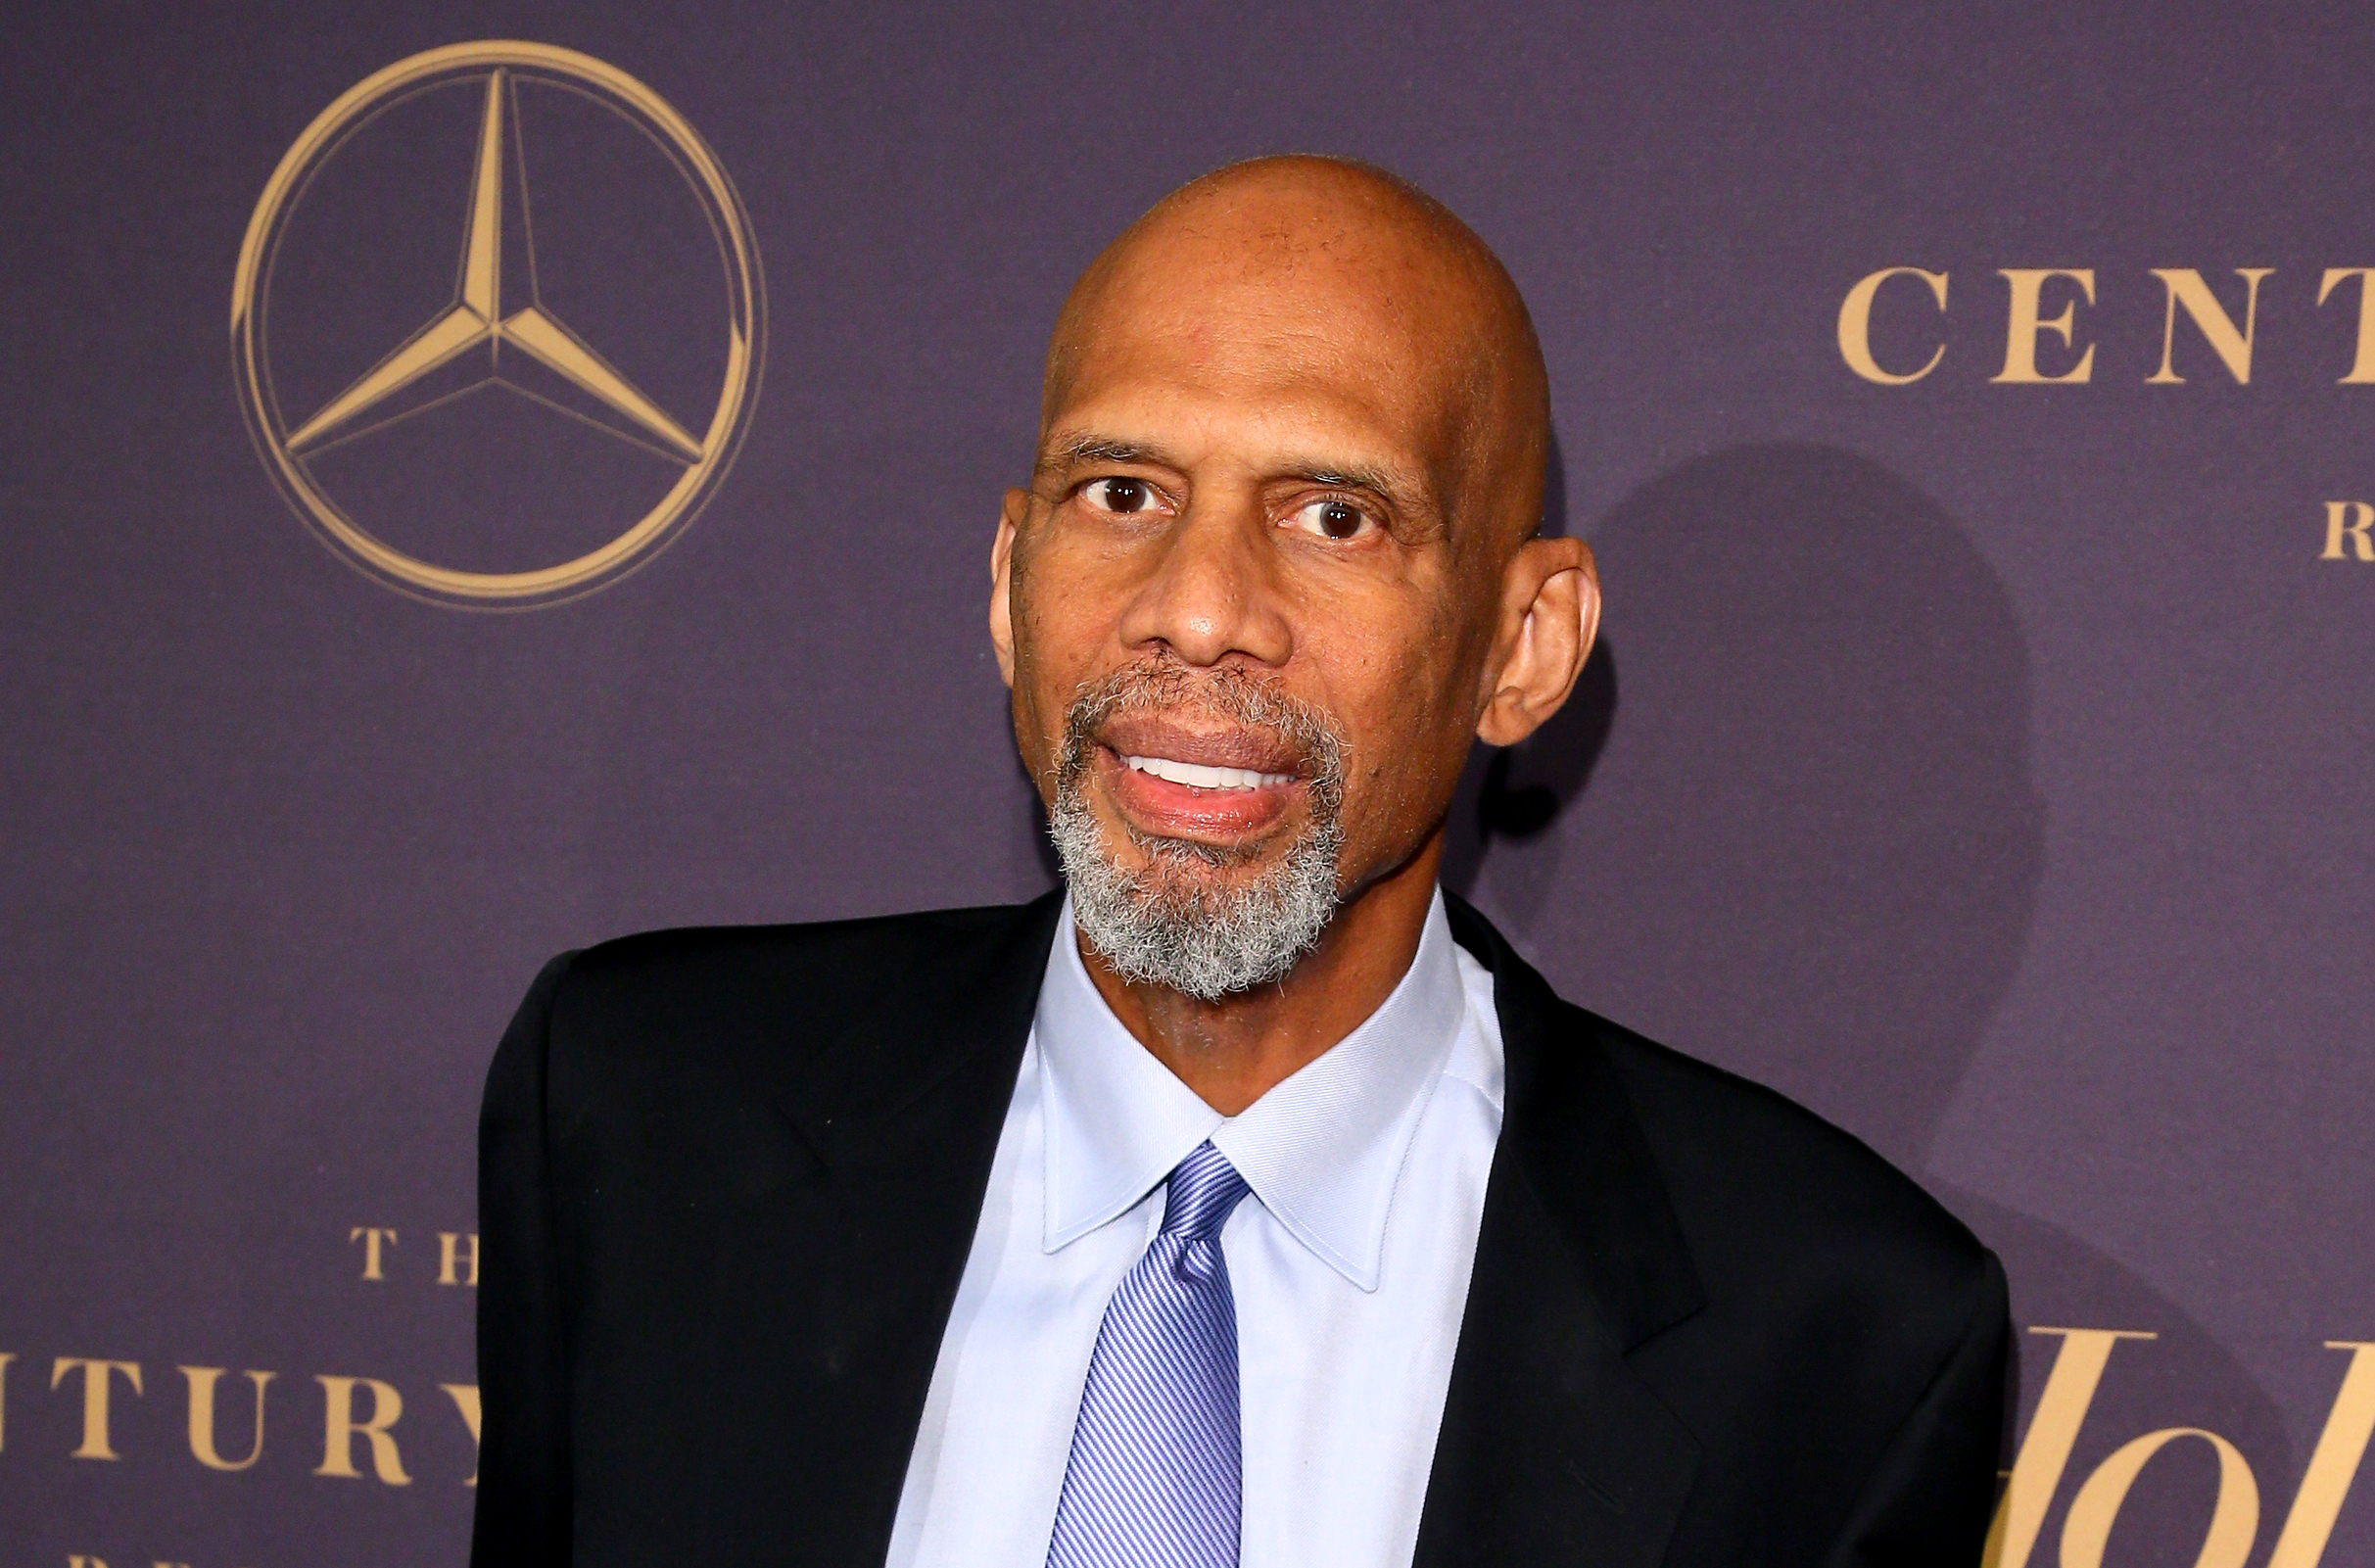 PHOTO: Kareem Abdul-Jabbar attends the Hollywood Reporter's 7th annual nominees night in Beverly Hills, Calif., Feb. 4, 2019.